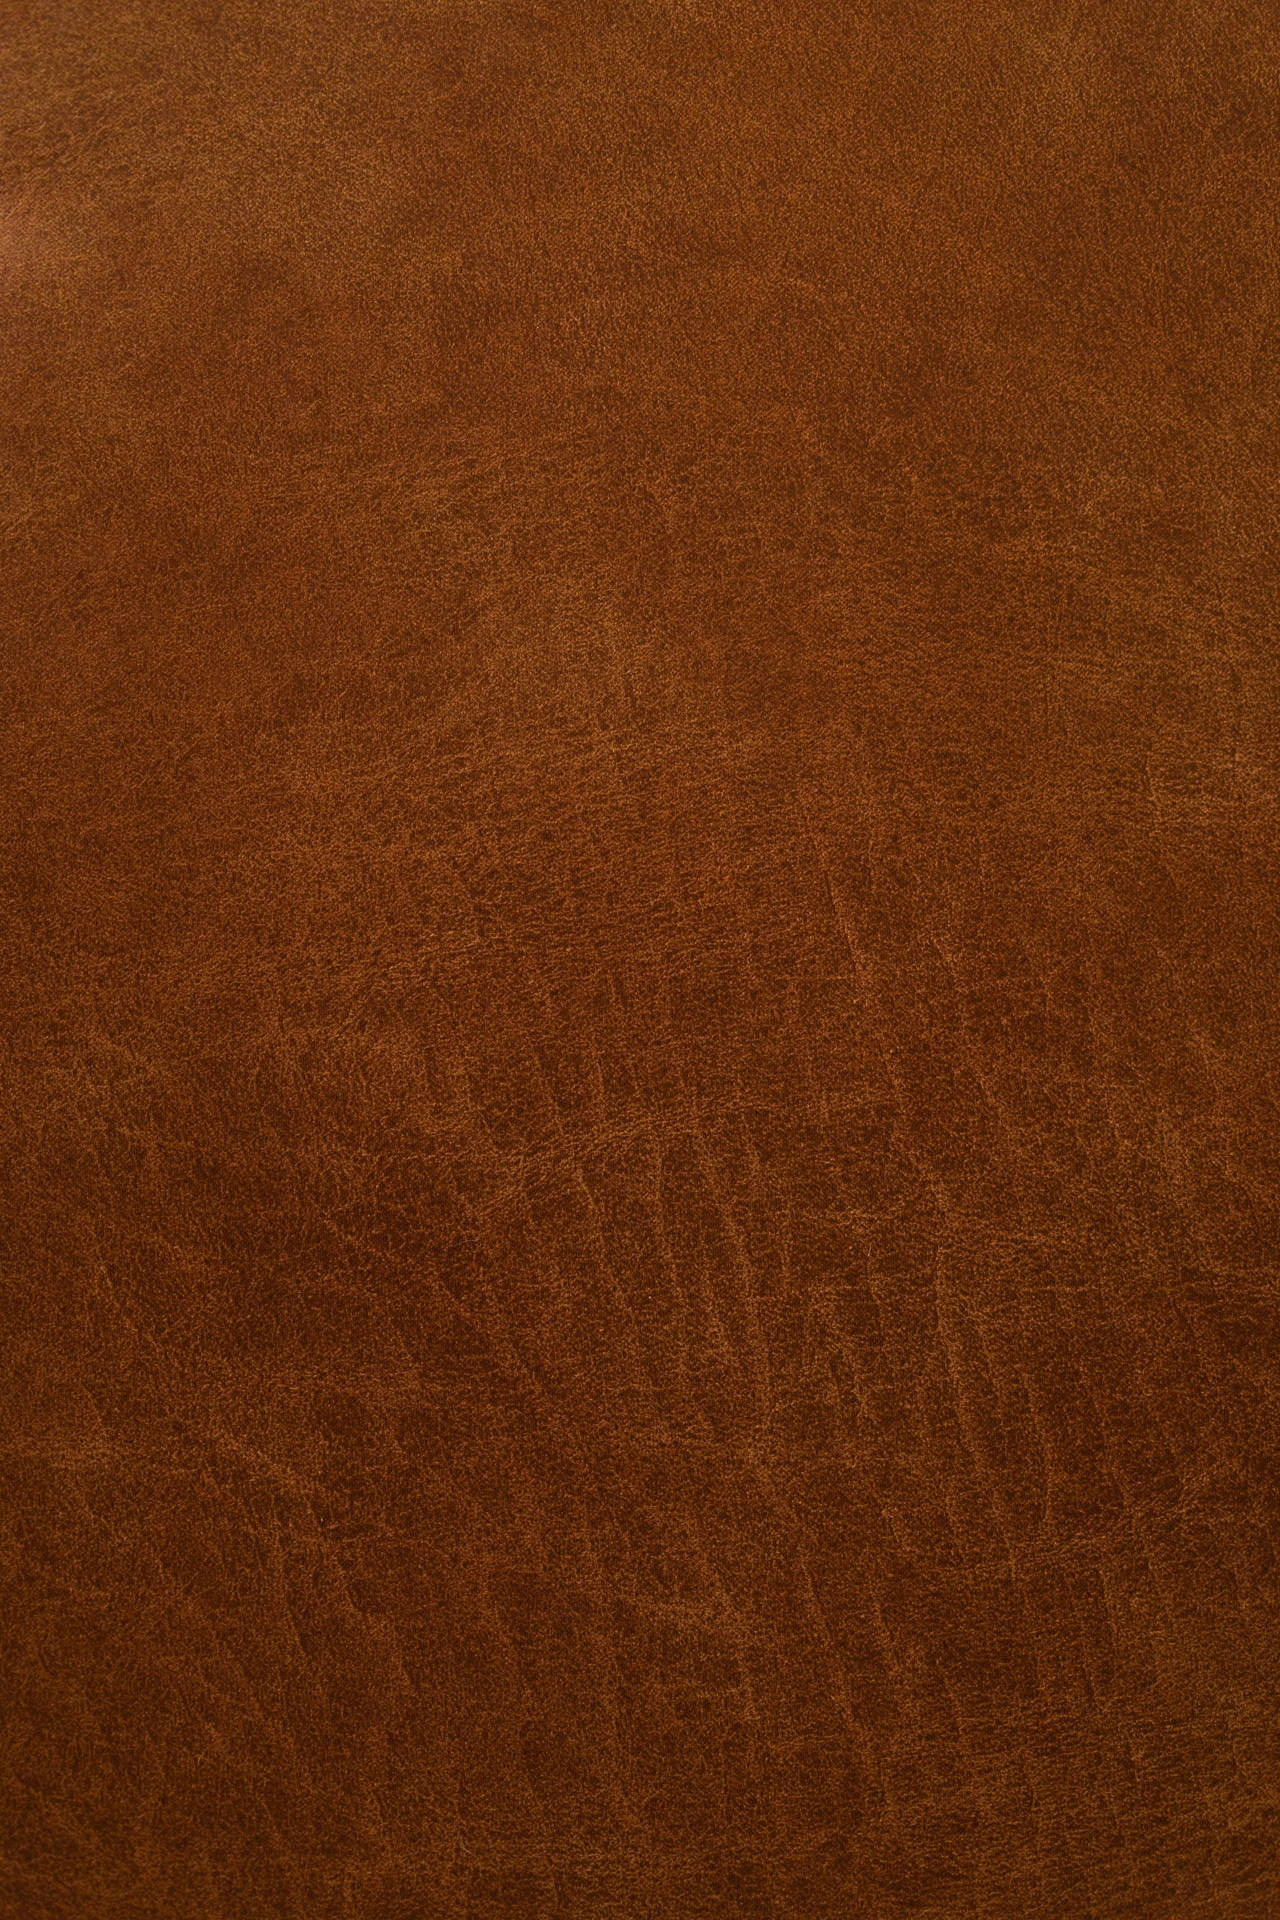 Leather Brown Surface Background